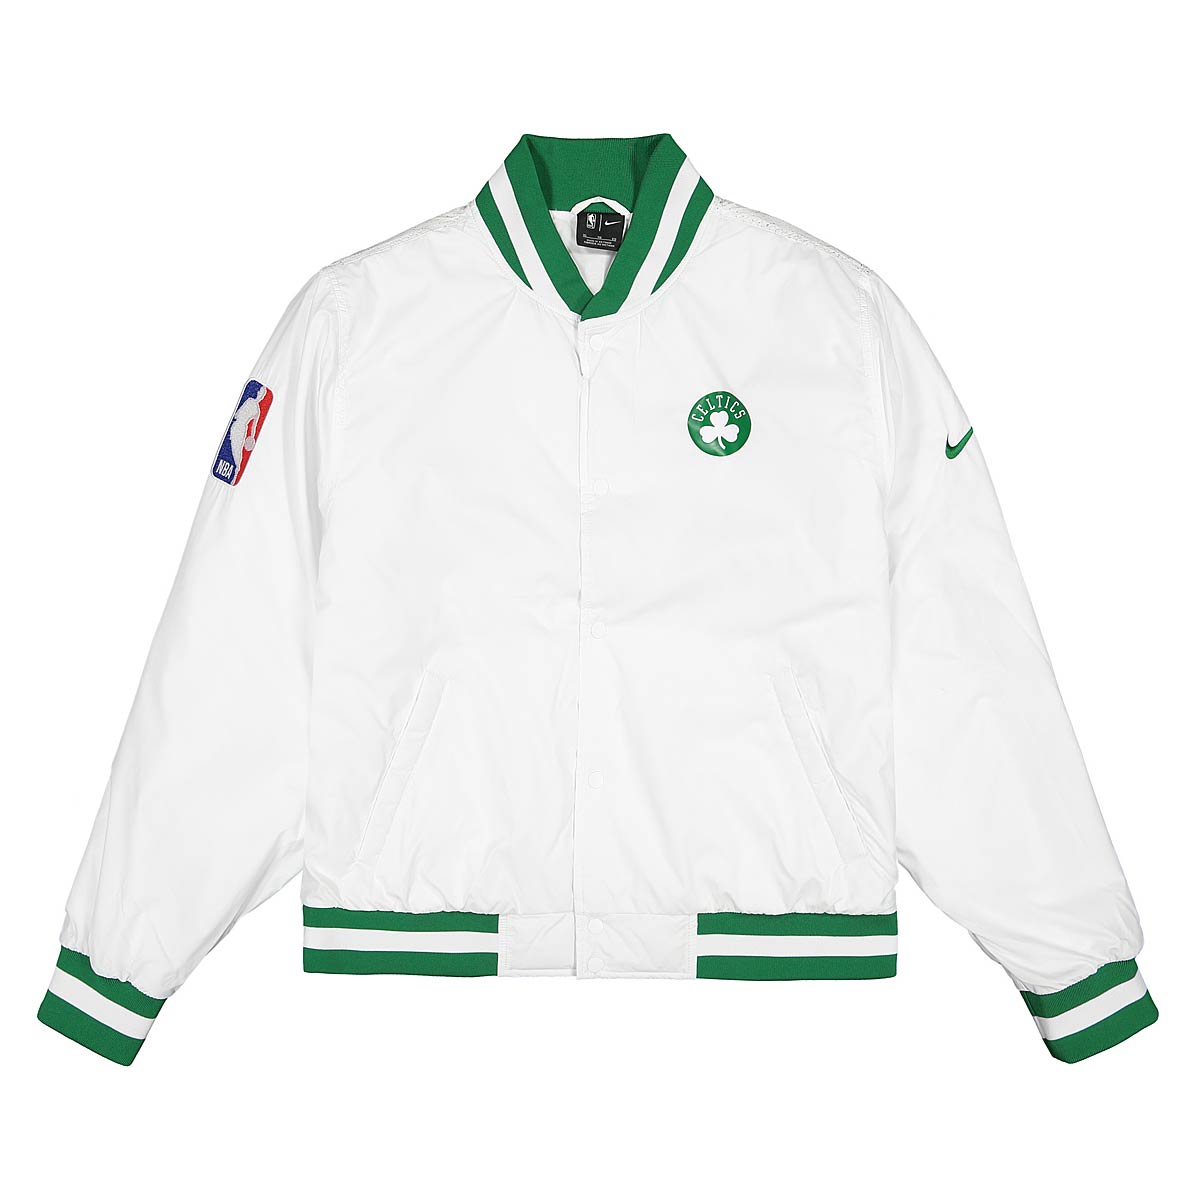 Buy NBA BOSTON CELTICS TRACKSUIT CTS for N/A 0.0 on !